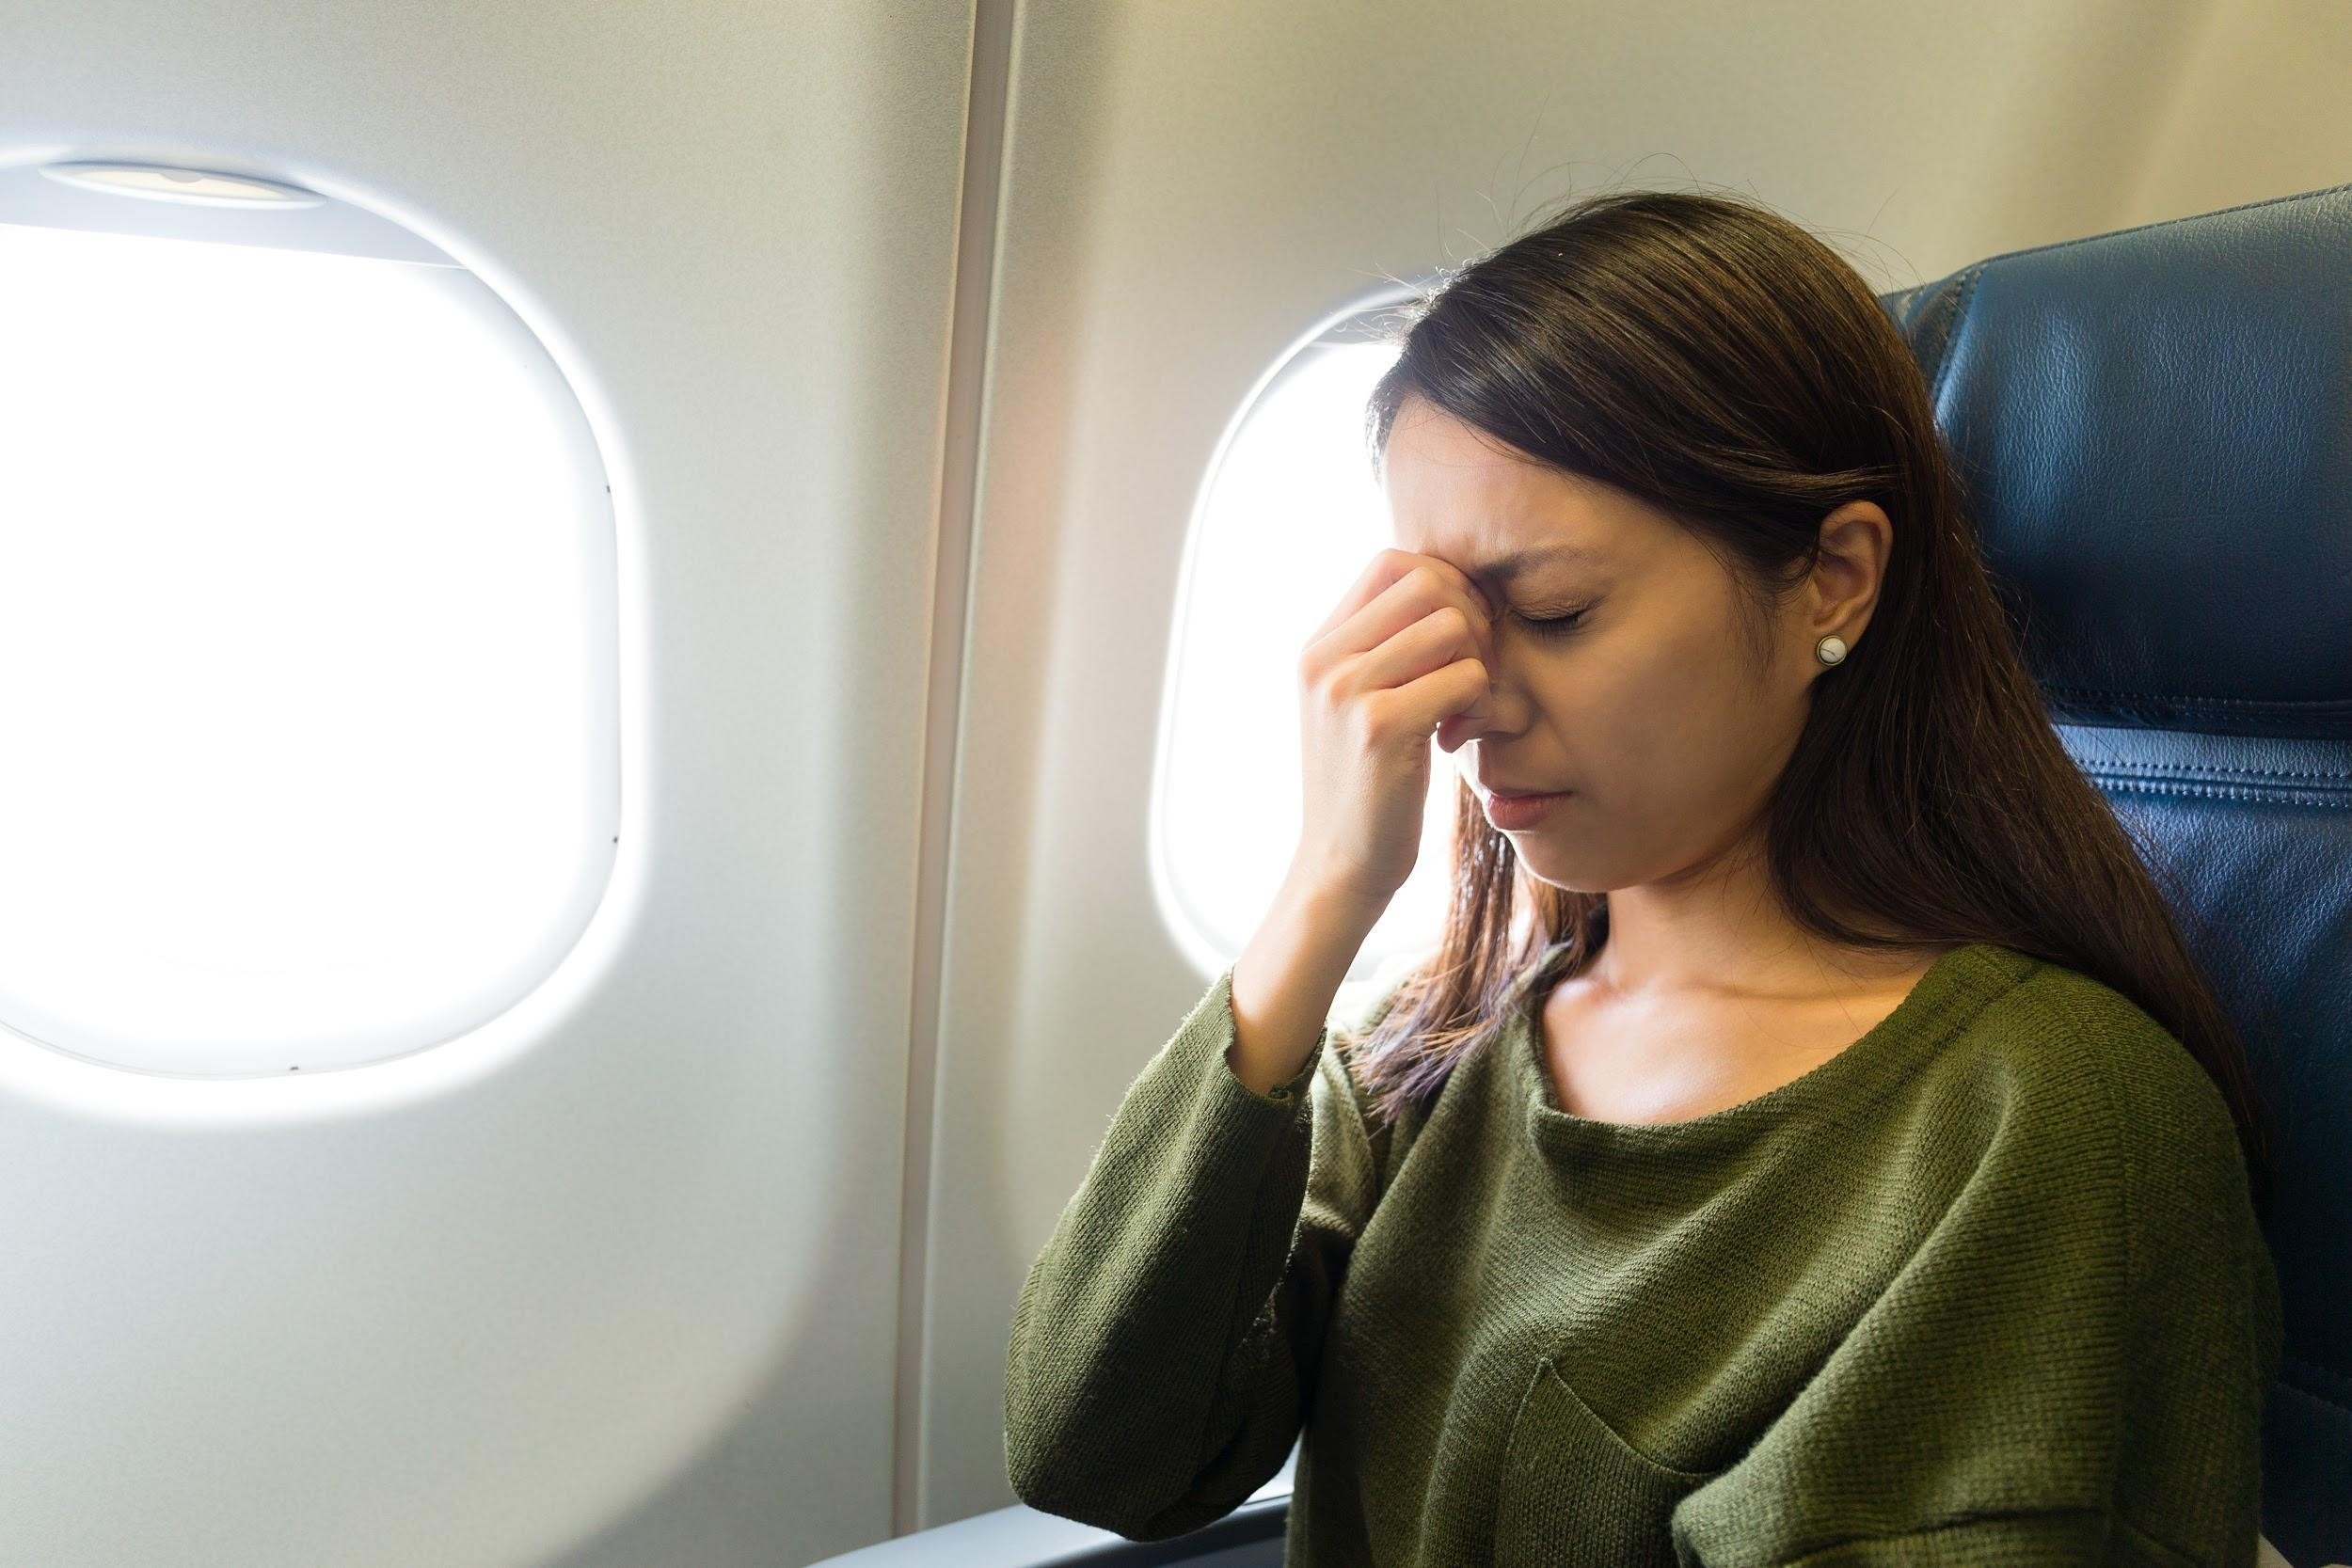 prevent panic attacks while flying